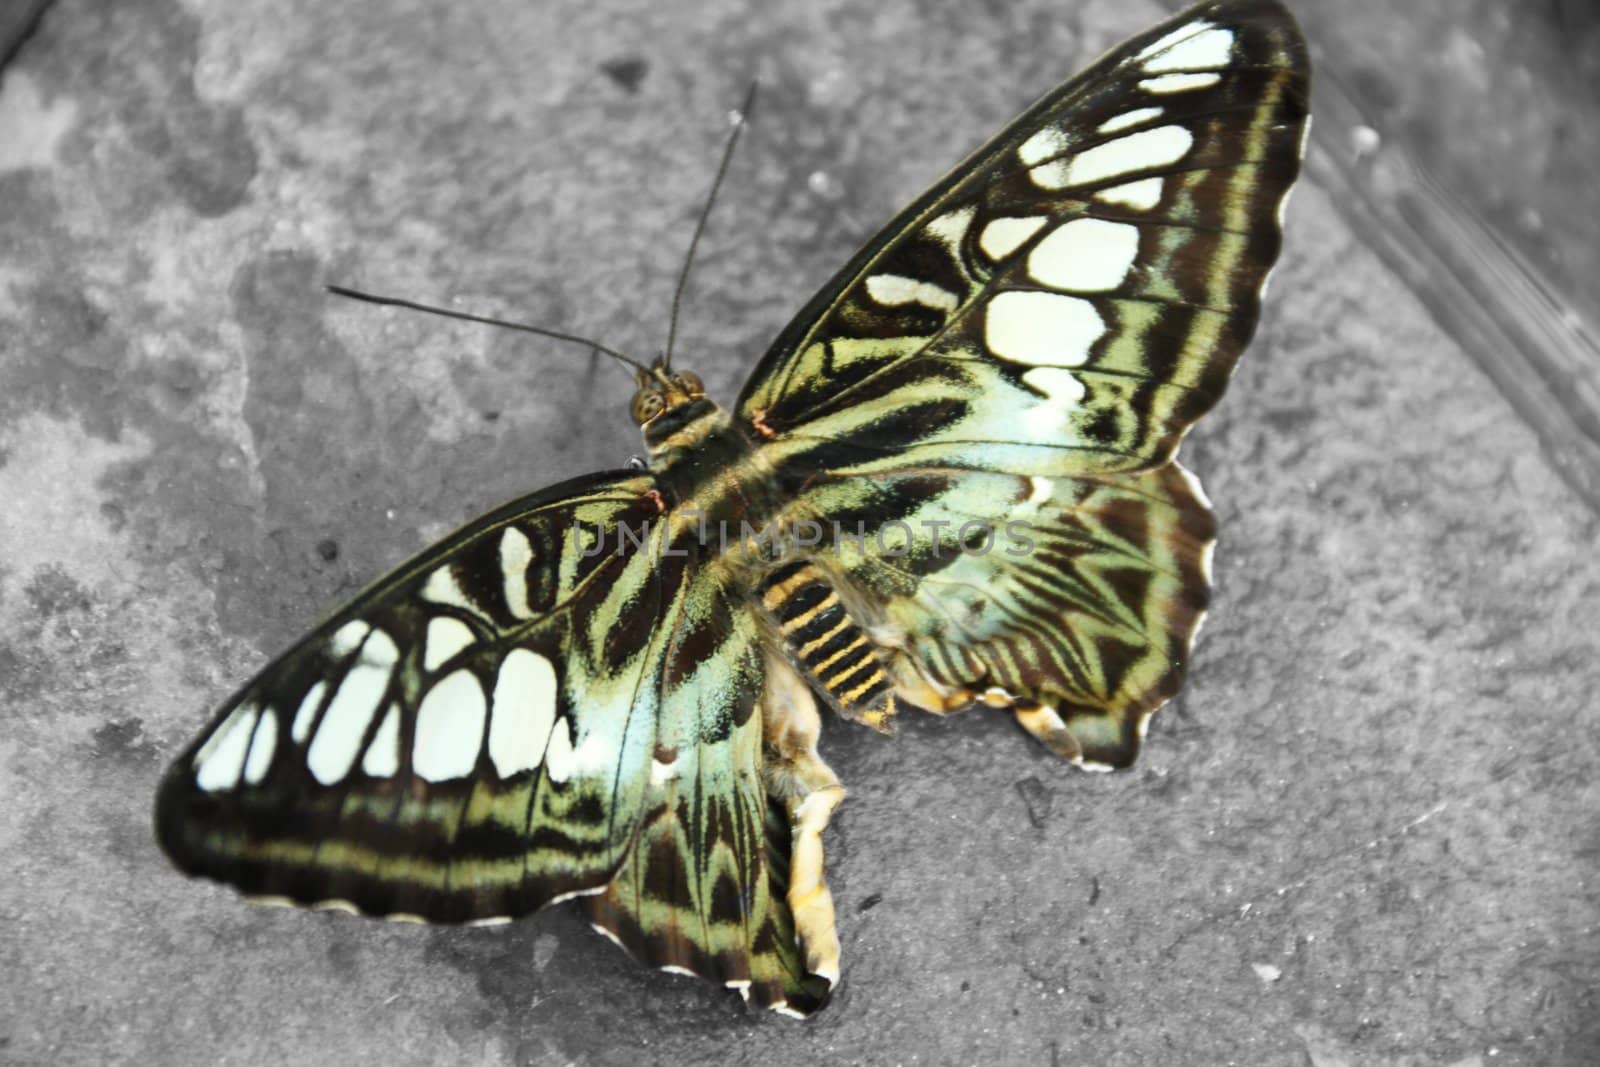 A butterfly selectively colored in a black and white image.